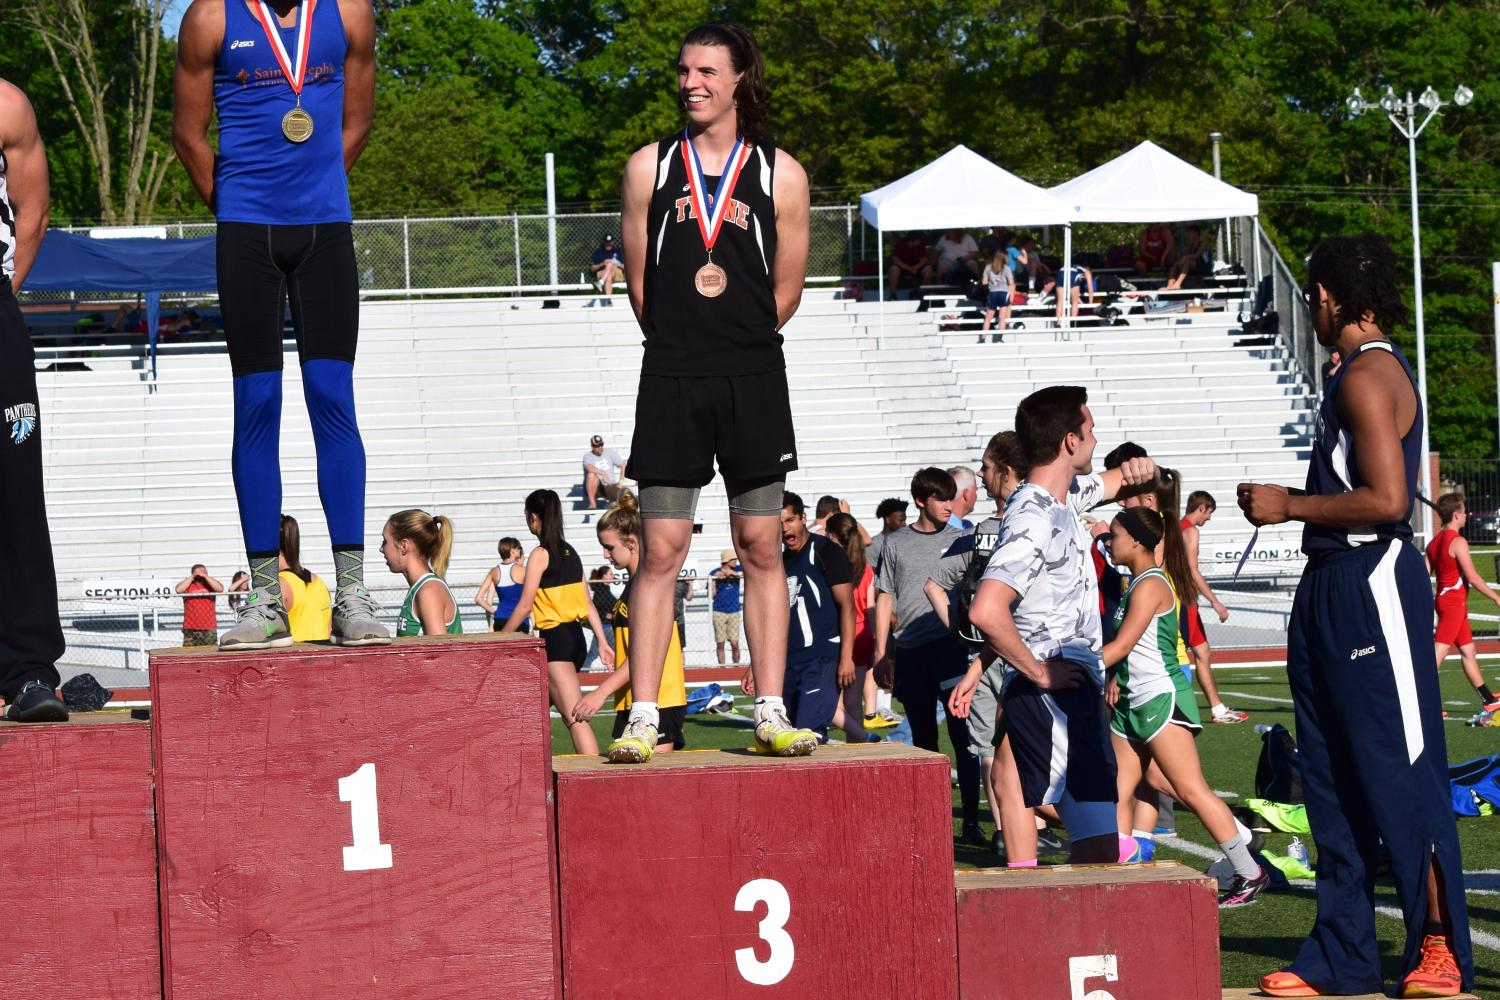 Jake Meredith placed third in the long jump and will move on to the state championship meet